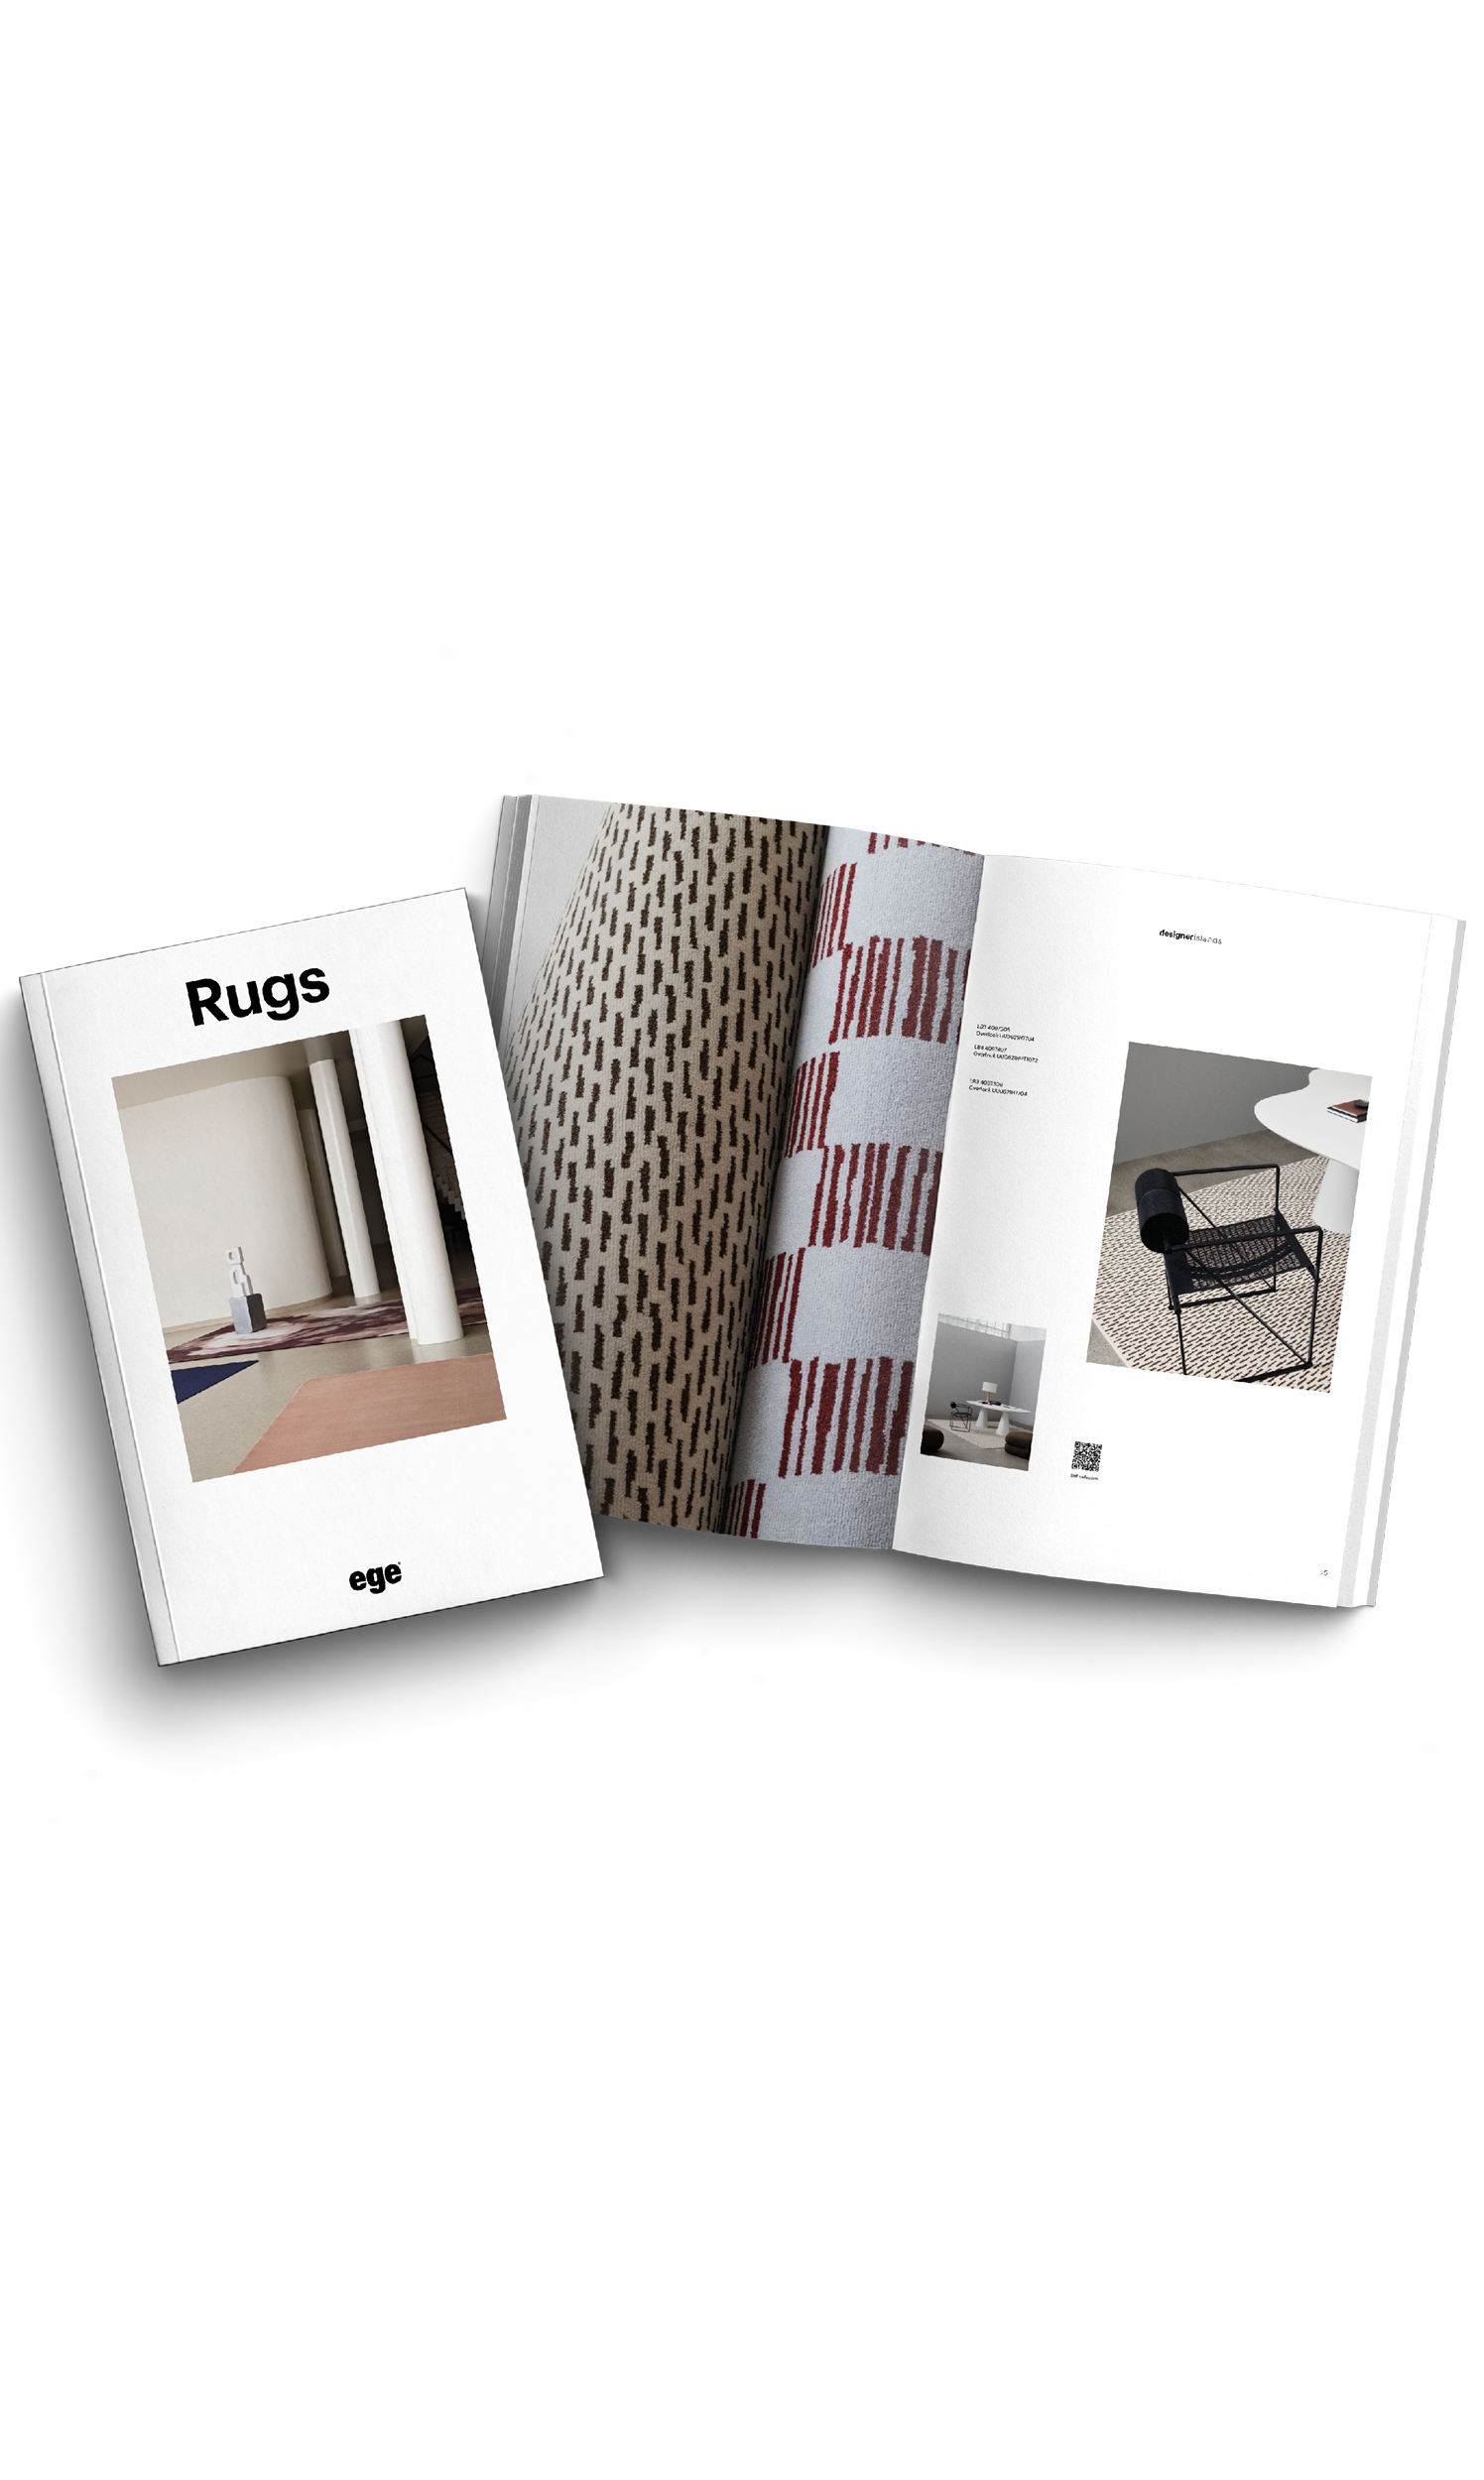 Discover our world of rugs and opportunities